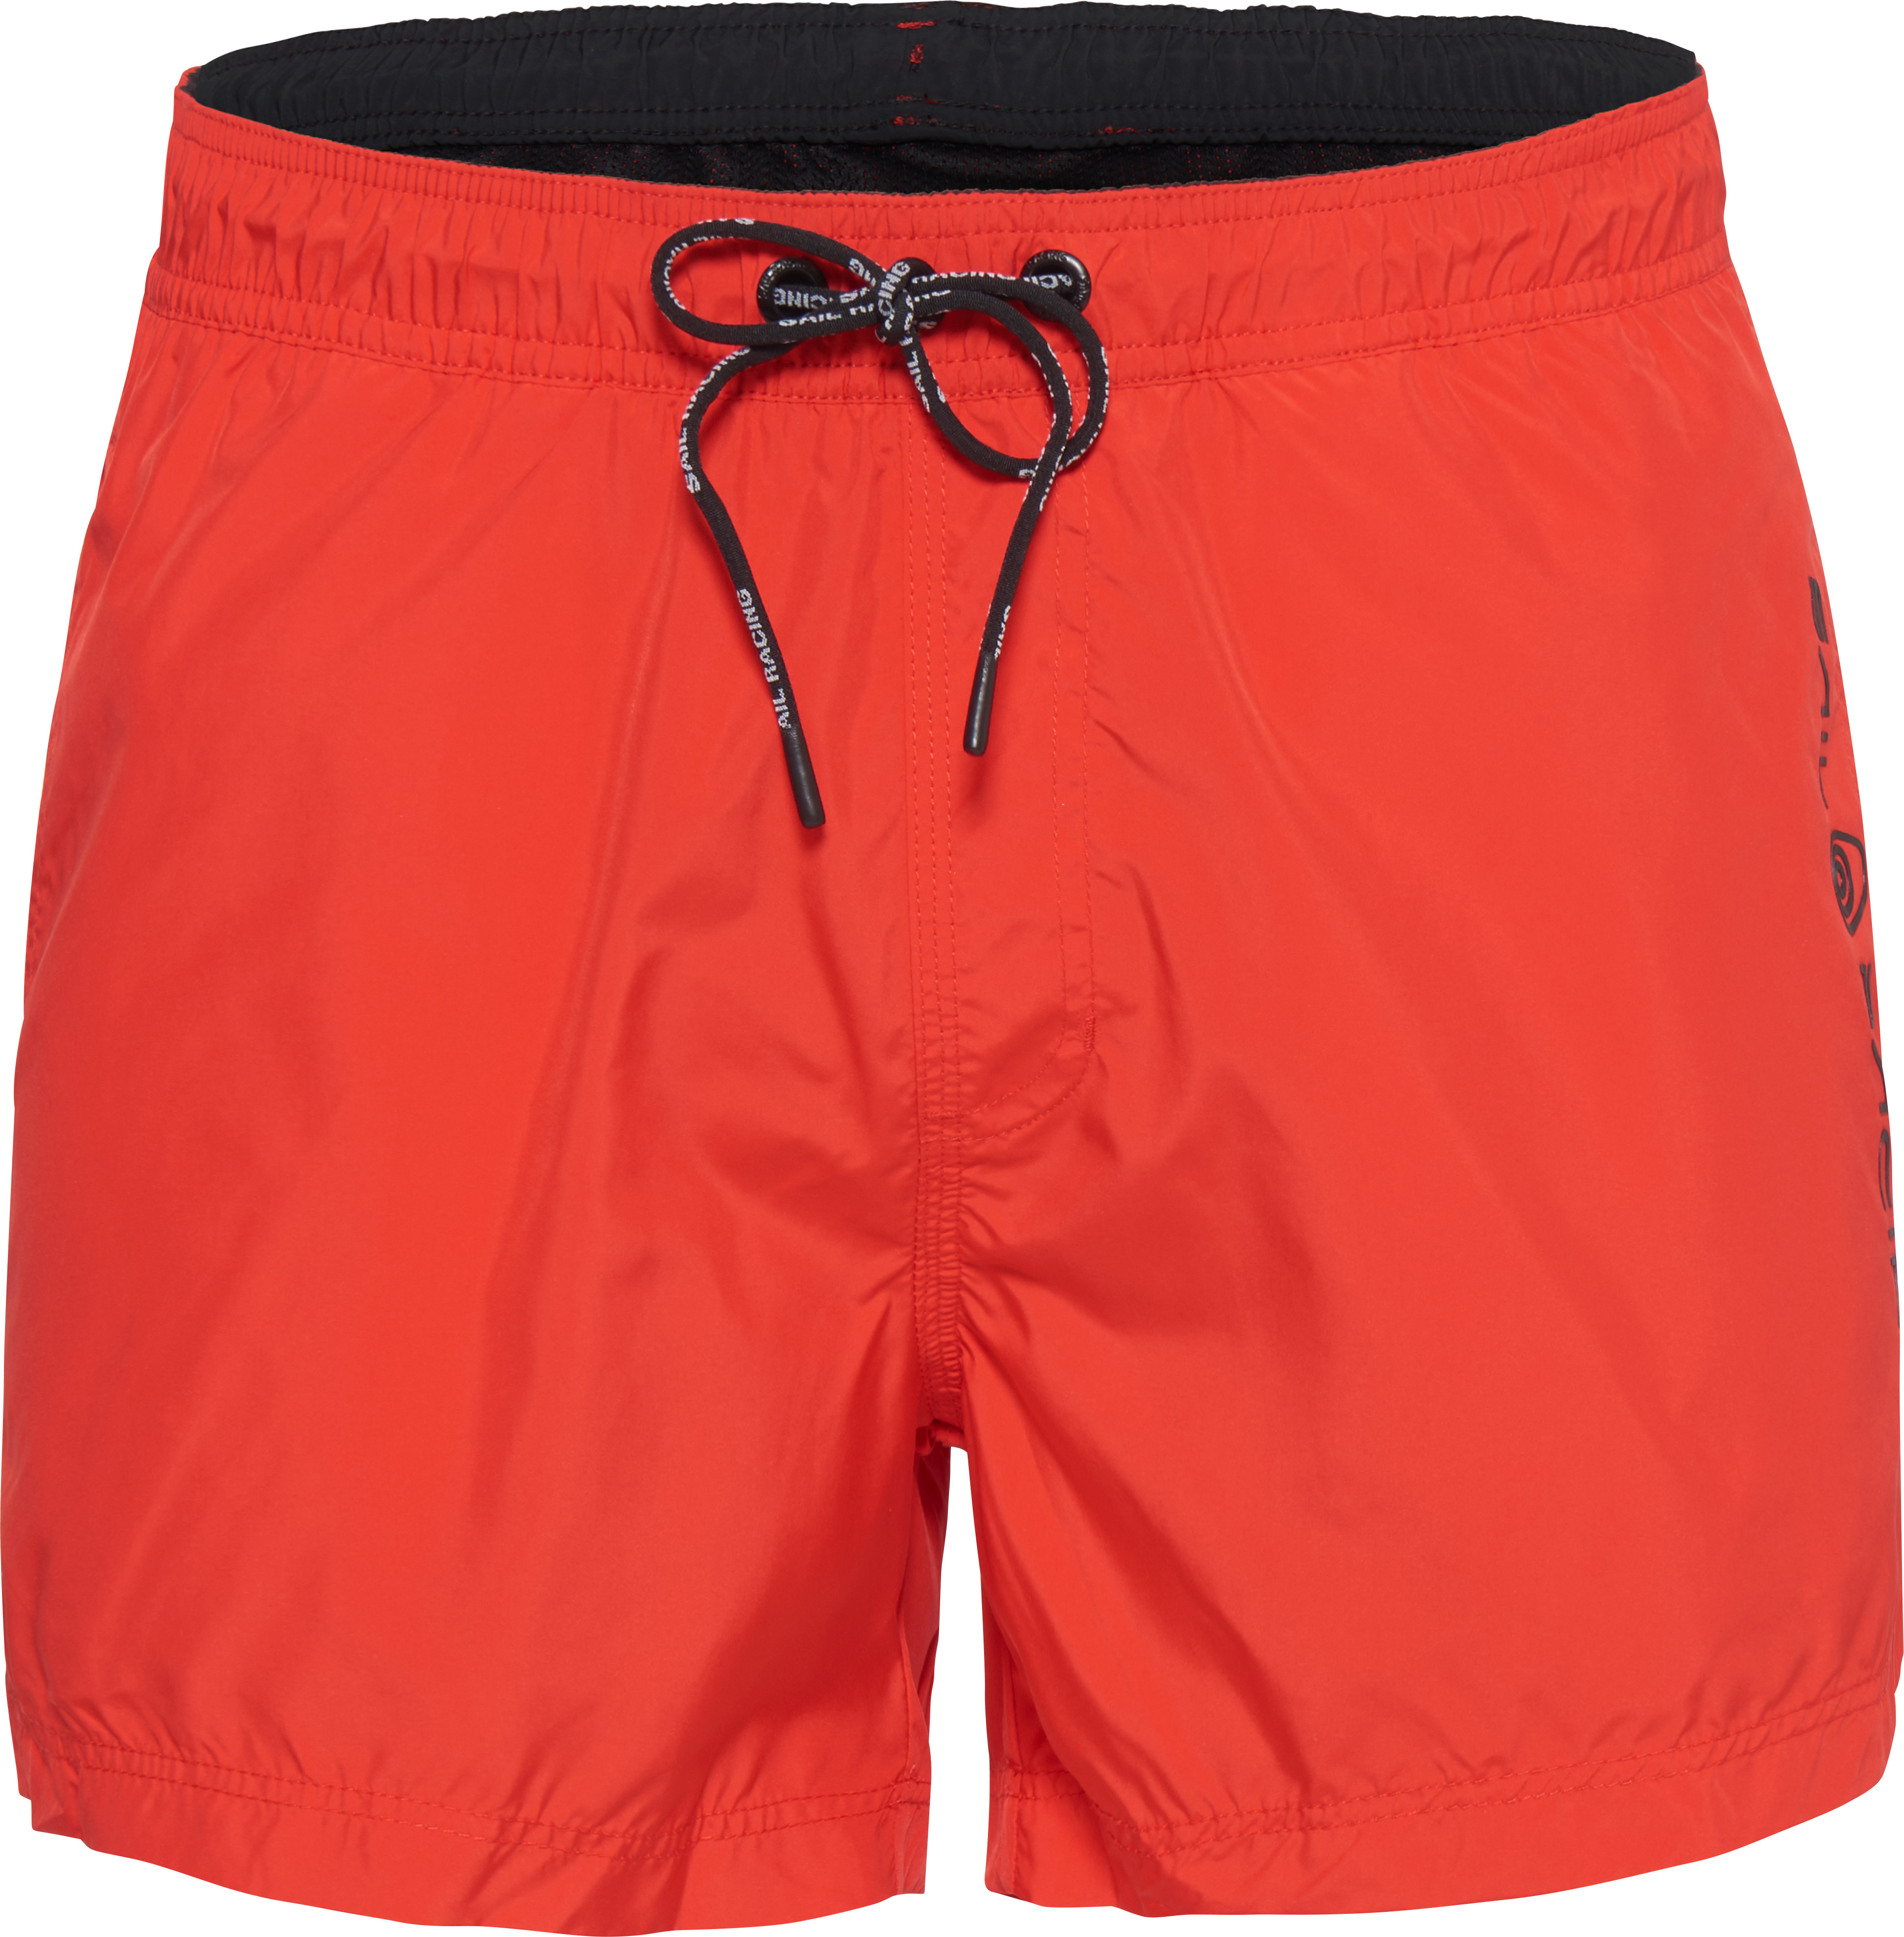 Sail Racing Men's Bowman Volley Shorts Bright Red S, Bright Red